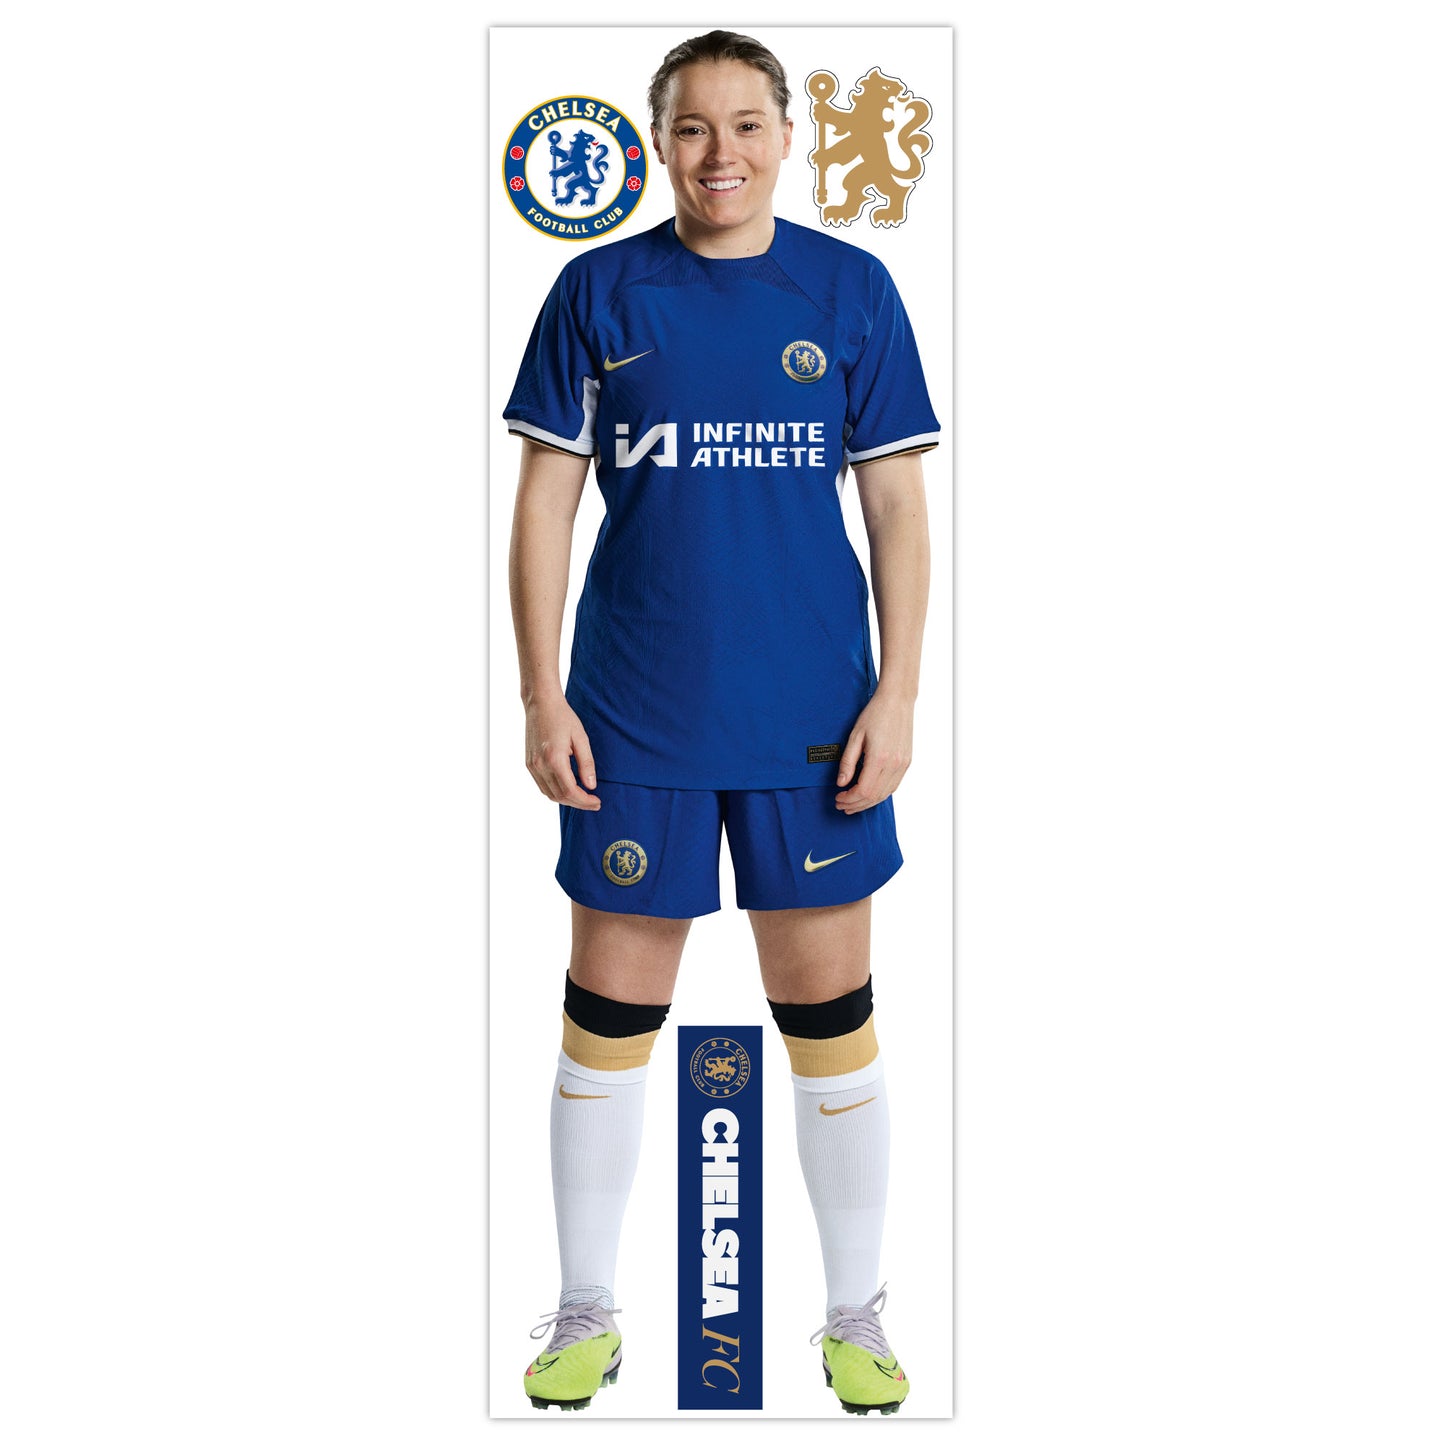 Chelsea FC - Fran Kirby 23/24 Player Wall Sticker + CFC Decal Set